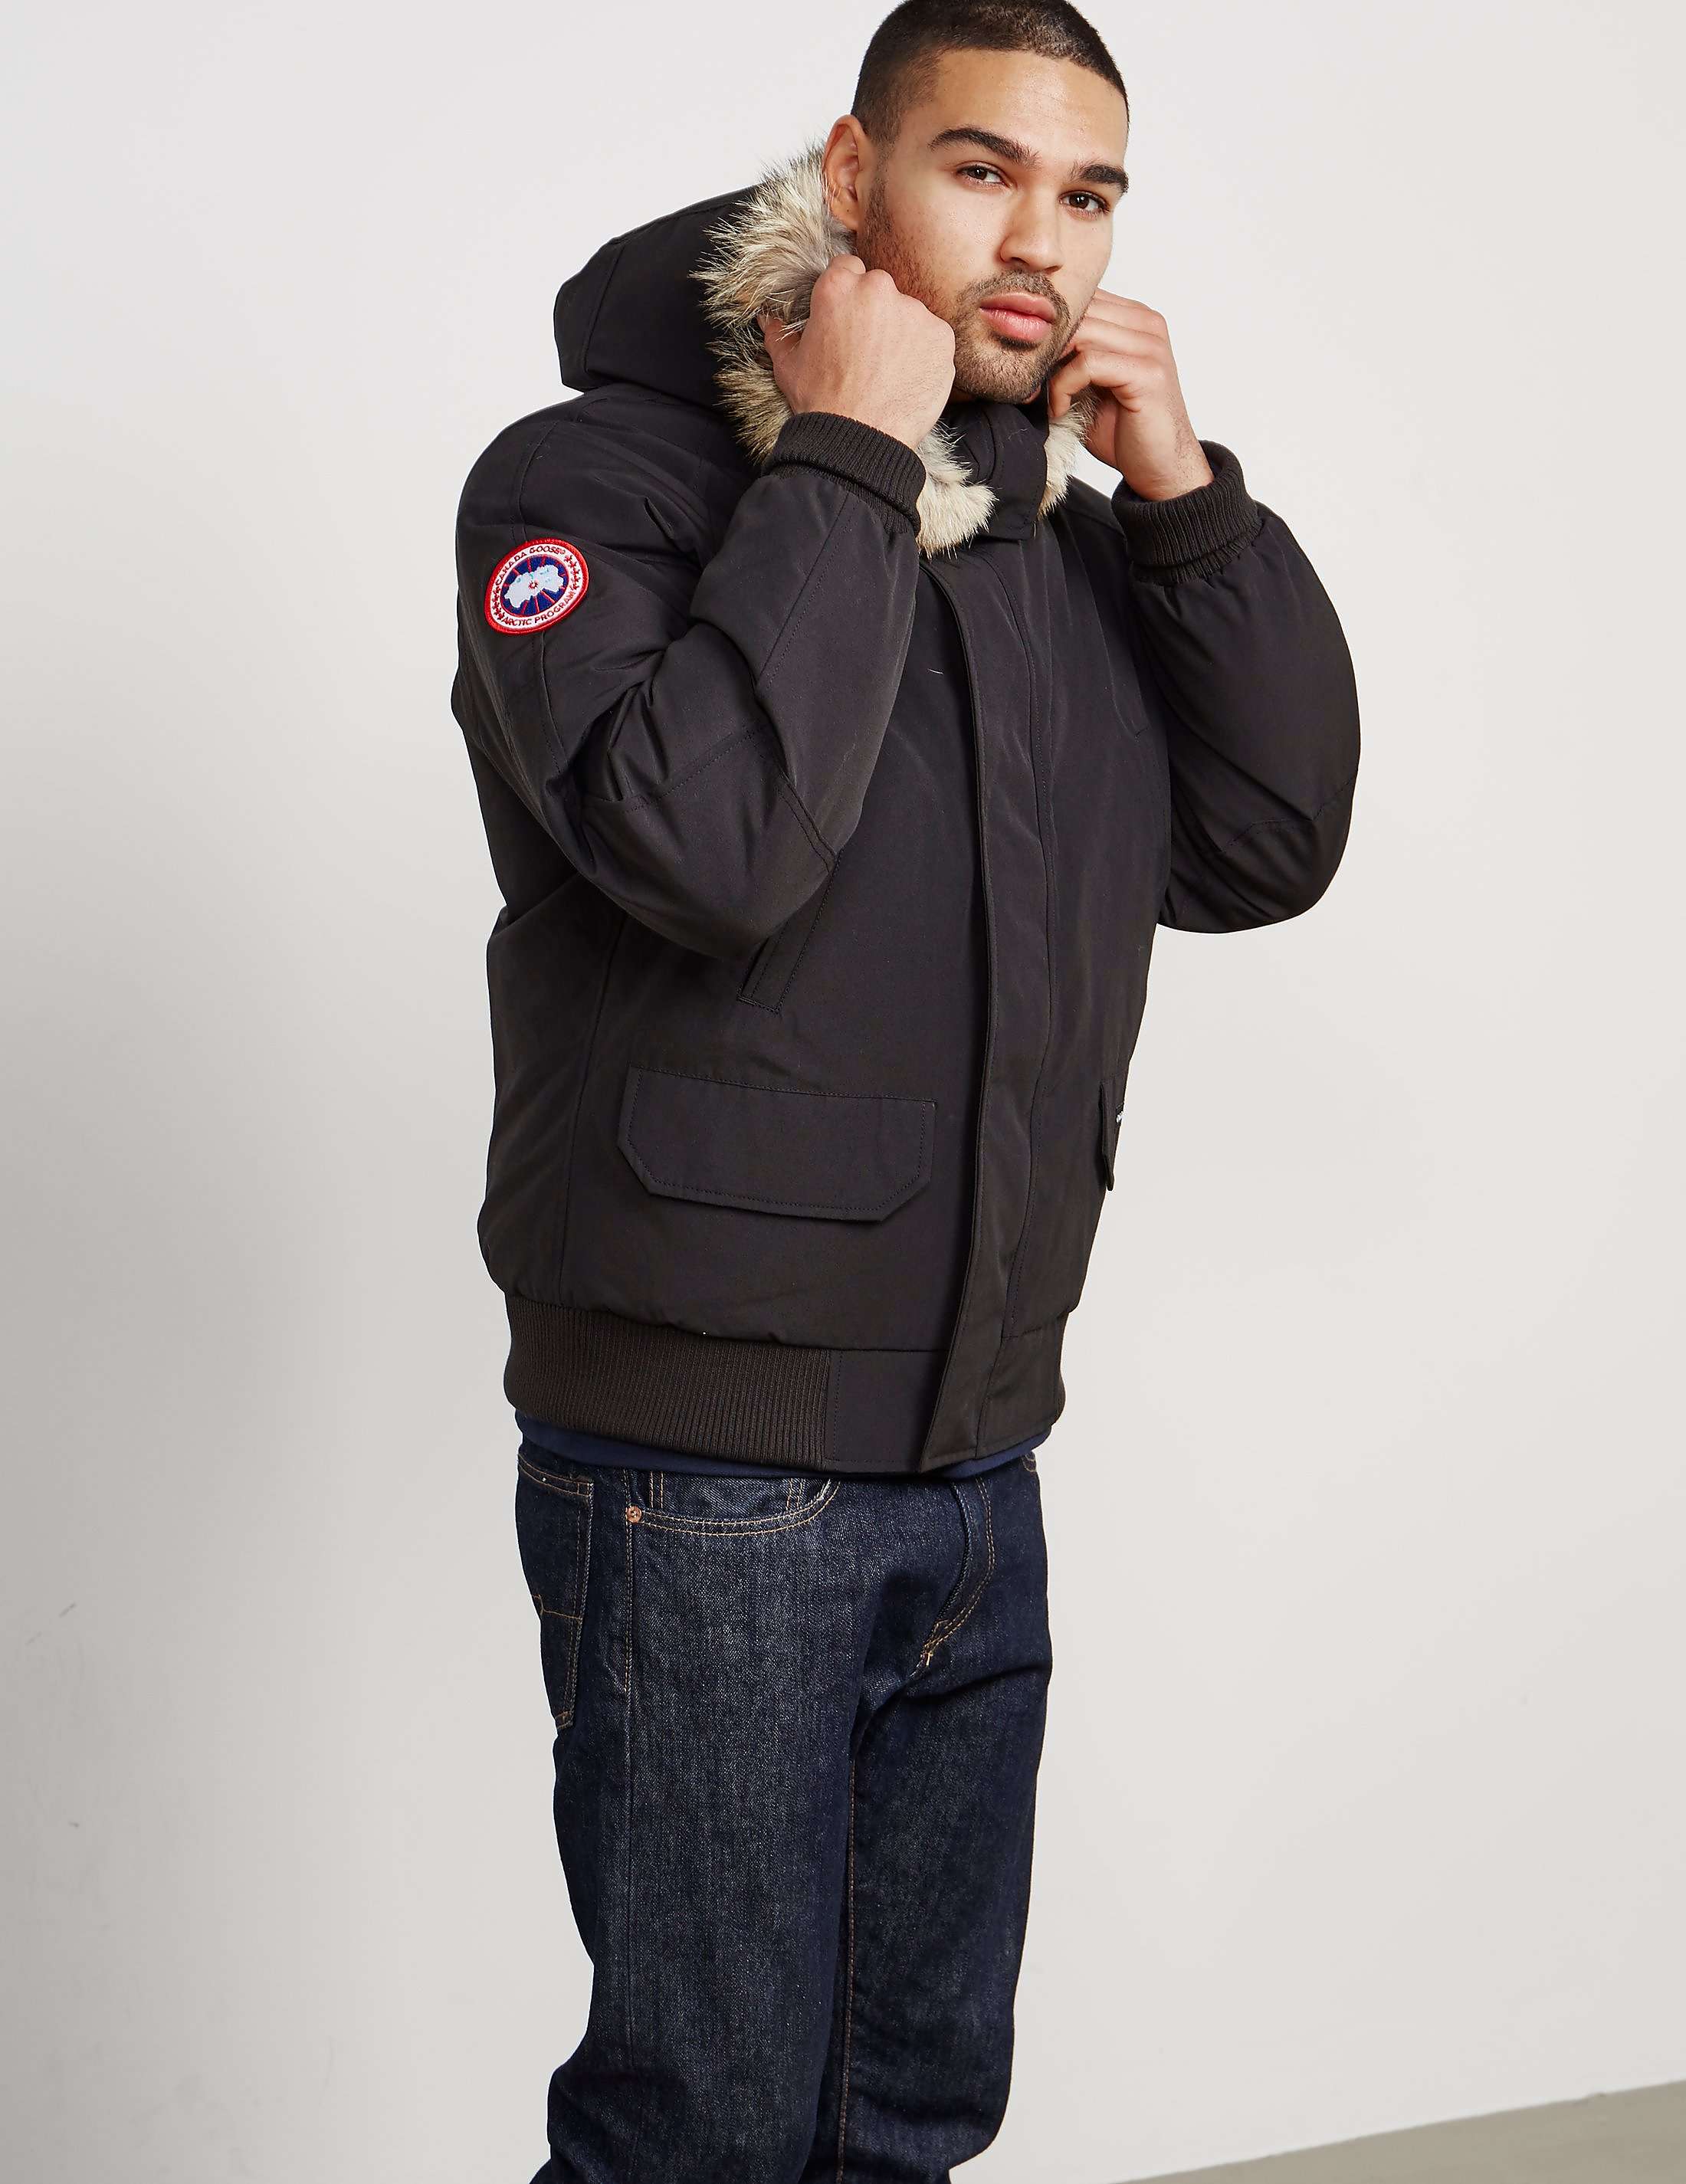 buy canada goose chilliwack for cheap from brand canada goose